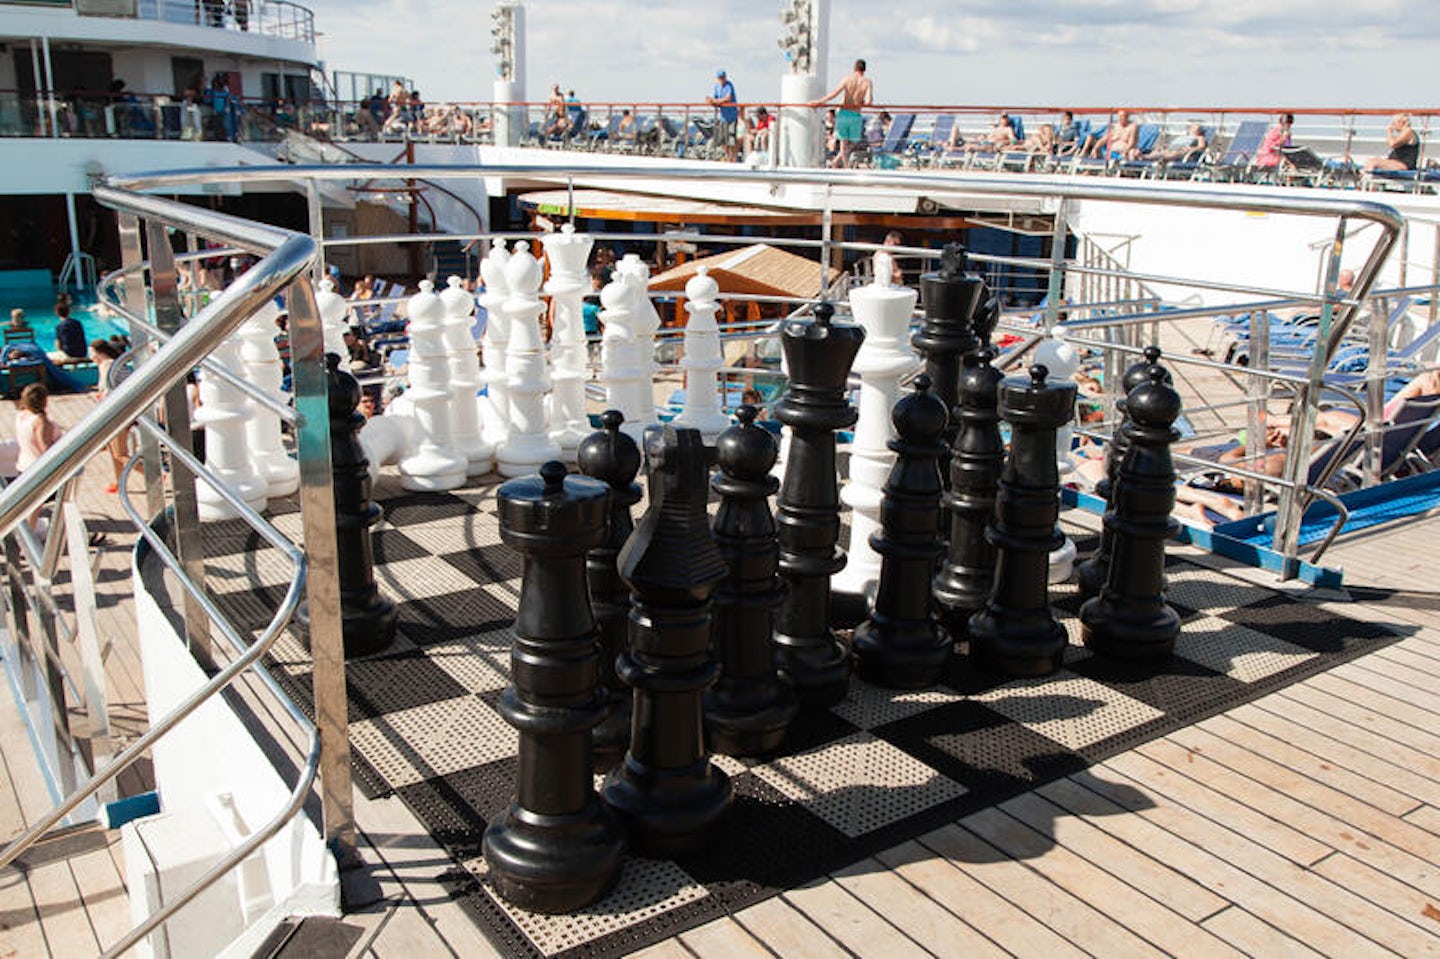 Deck Games on Carnival Glory